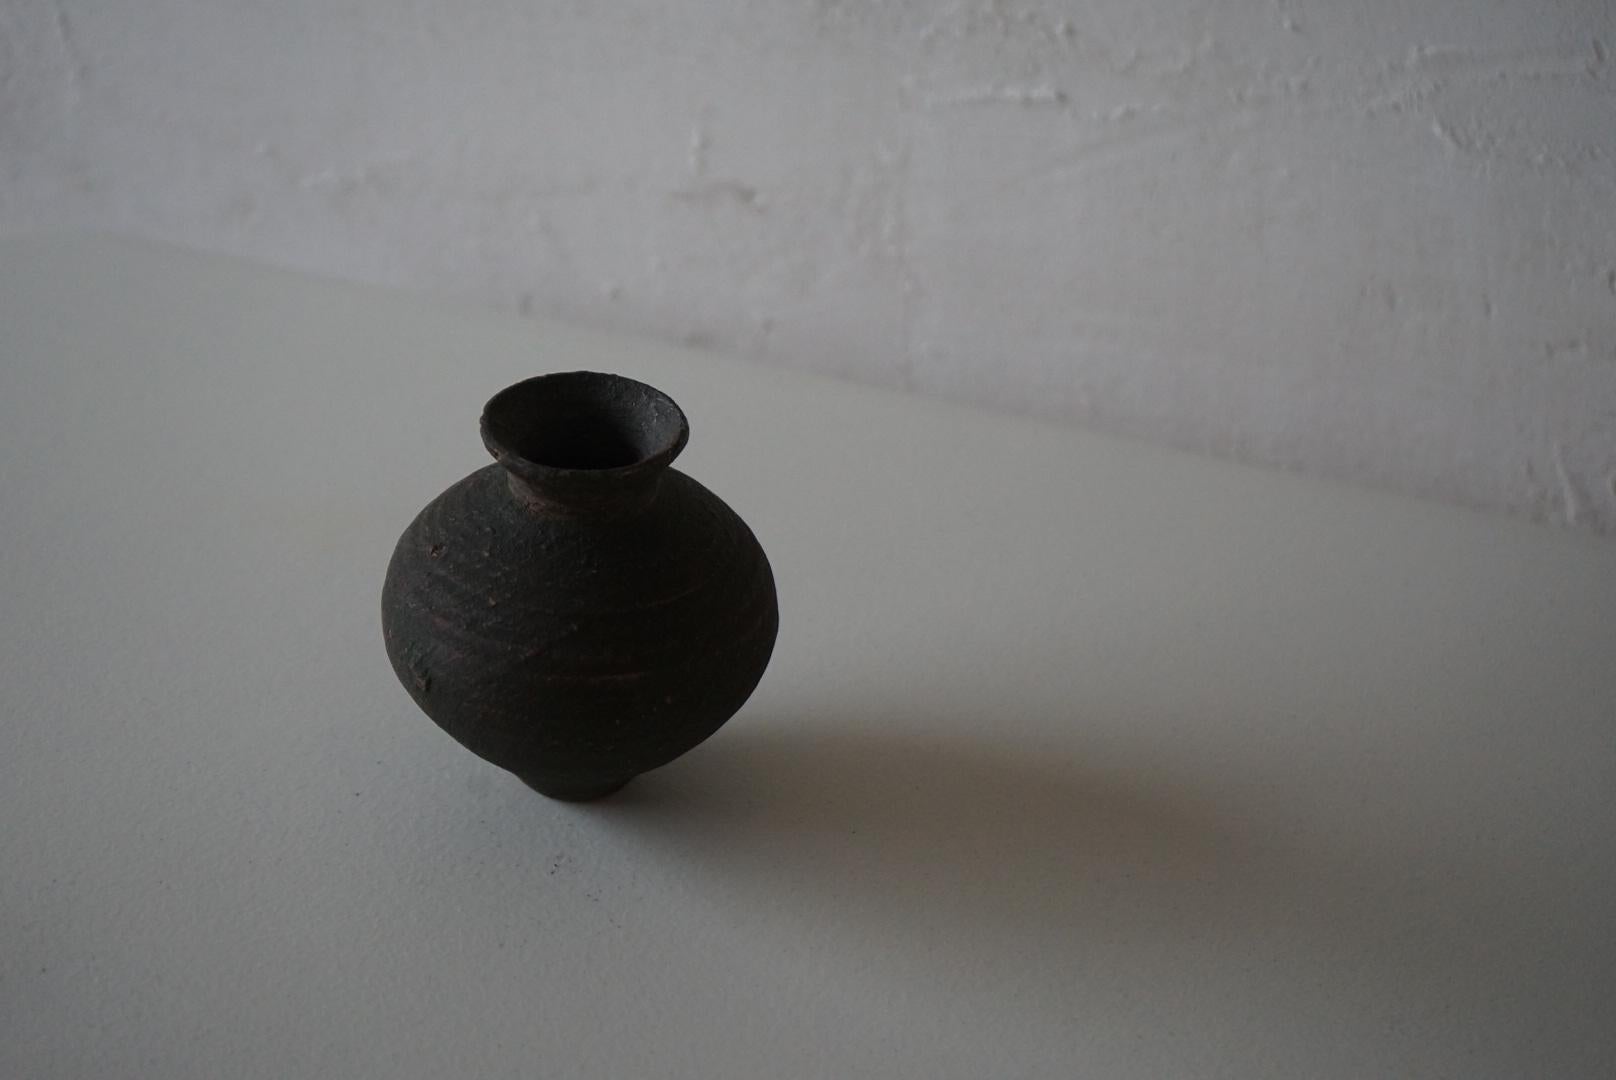 This is a Japanese small jar.
small unglazed jar.
It may have been a daily utensil or seed jar for farmers, or something like a ritual utensil used in agricultural rituals.
It's such a beautiful shape.
Many of them have a chipped mouth, but all